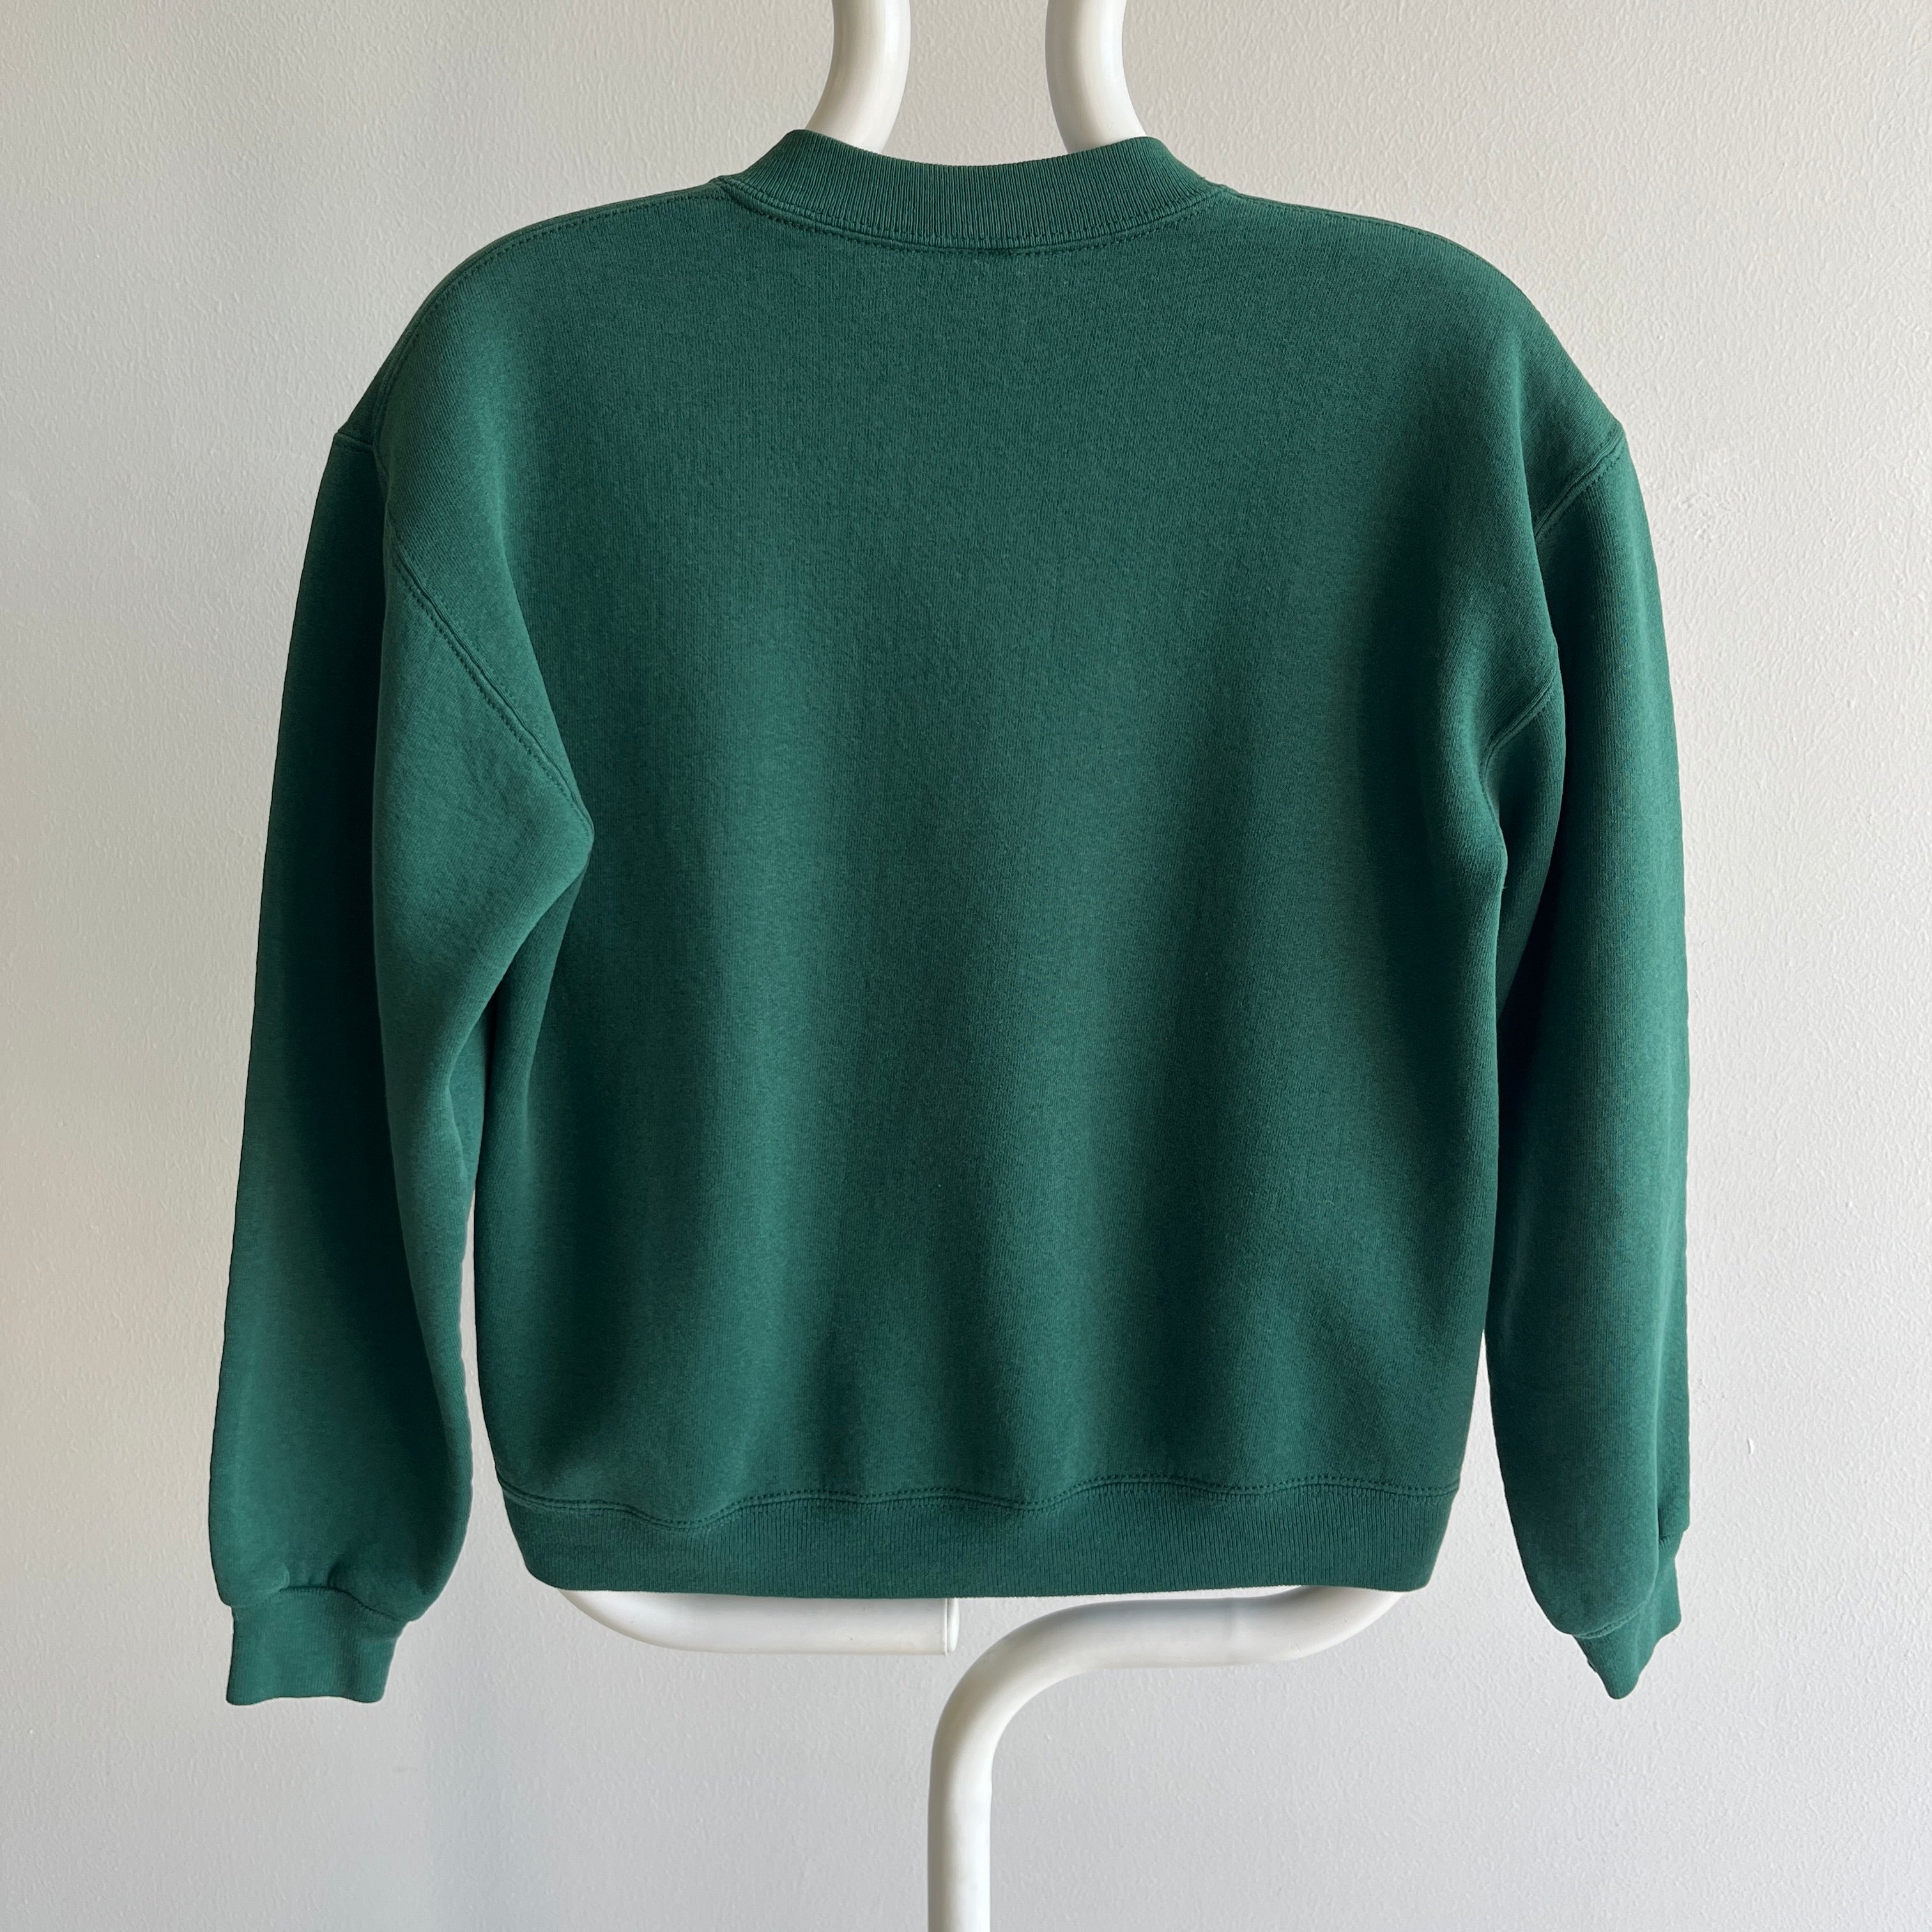 1980s Forest Green Youth XL Sweatshirt by Russell - YES